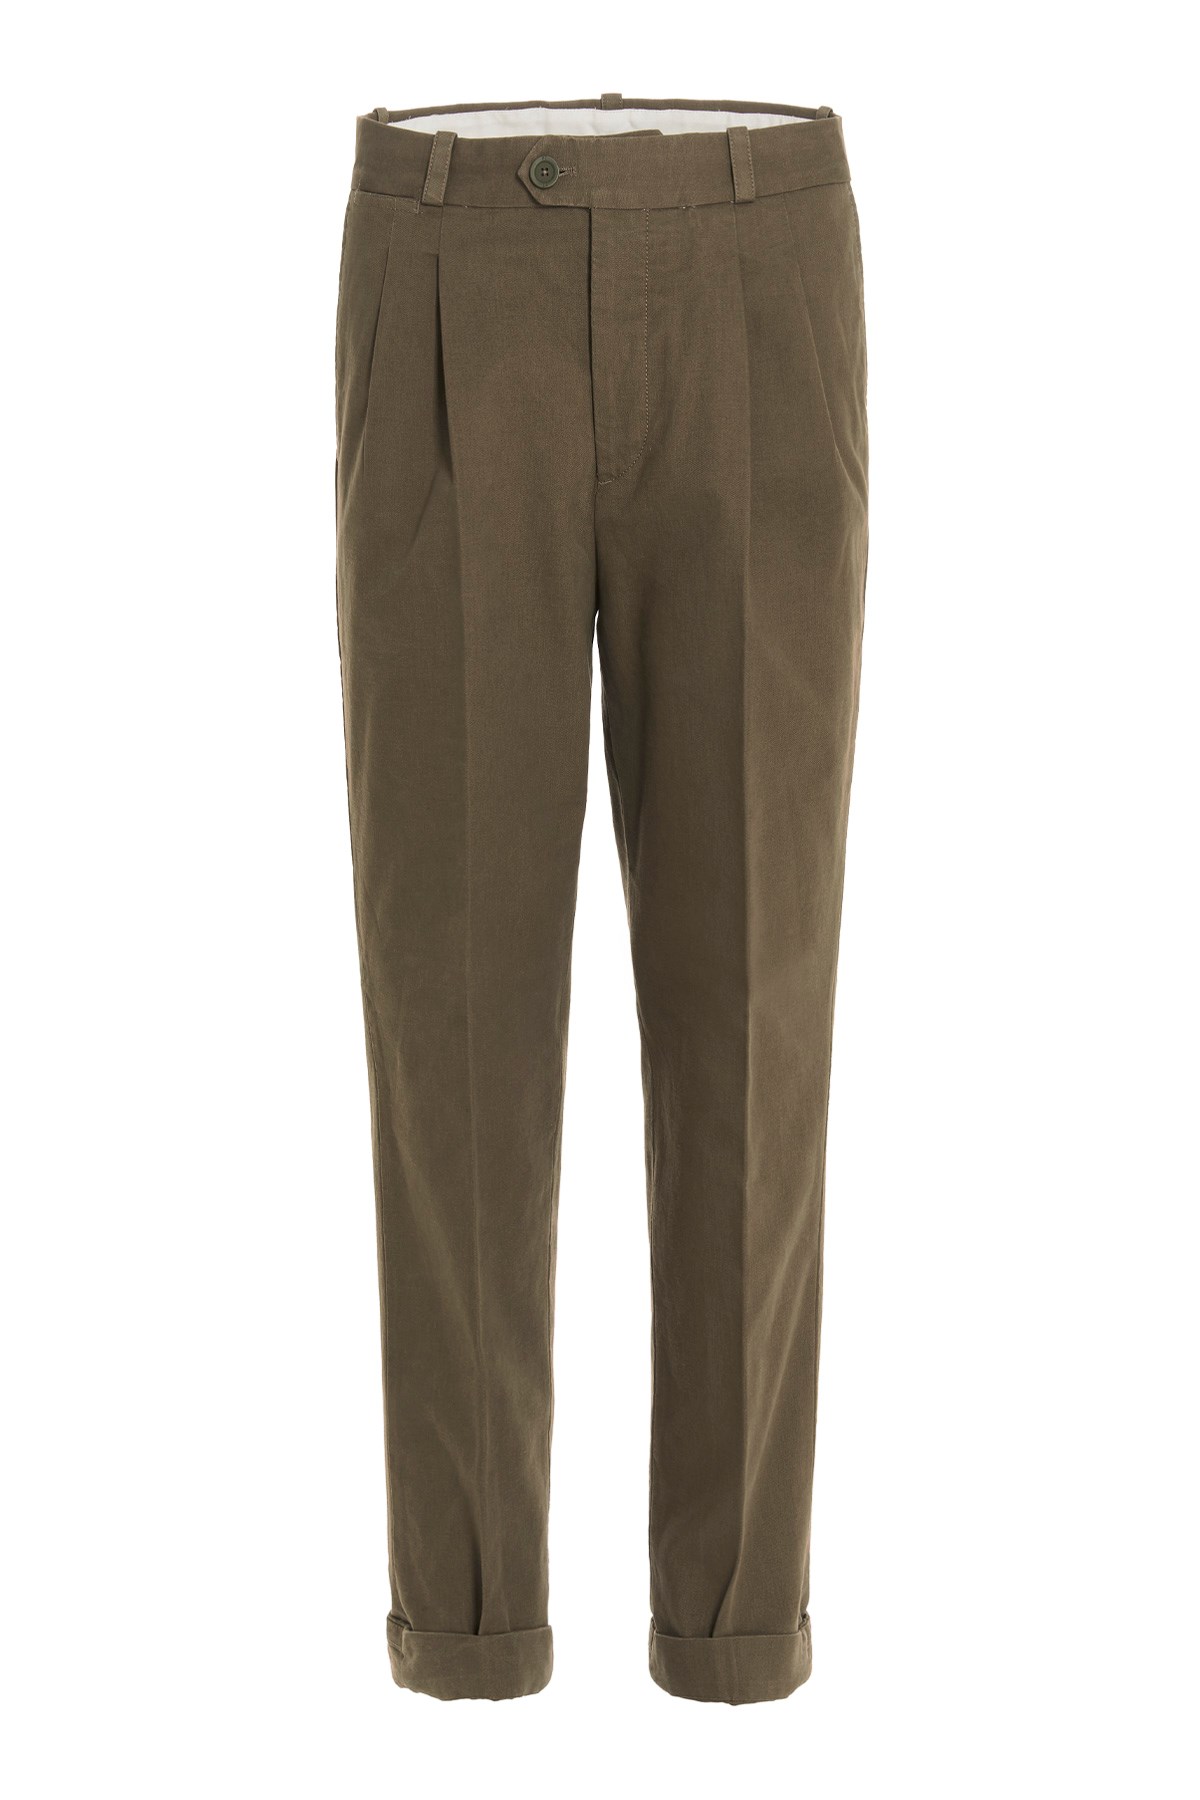 PT TORINO 'The Reporter’ Trousers